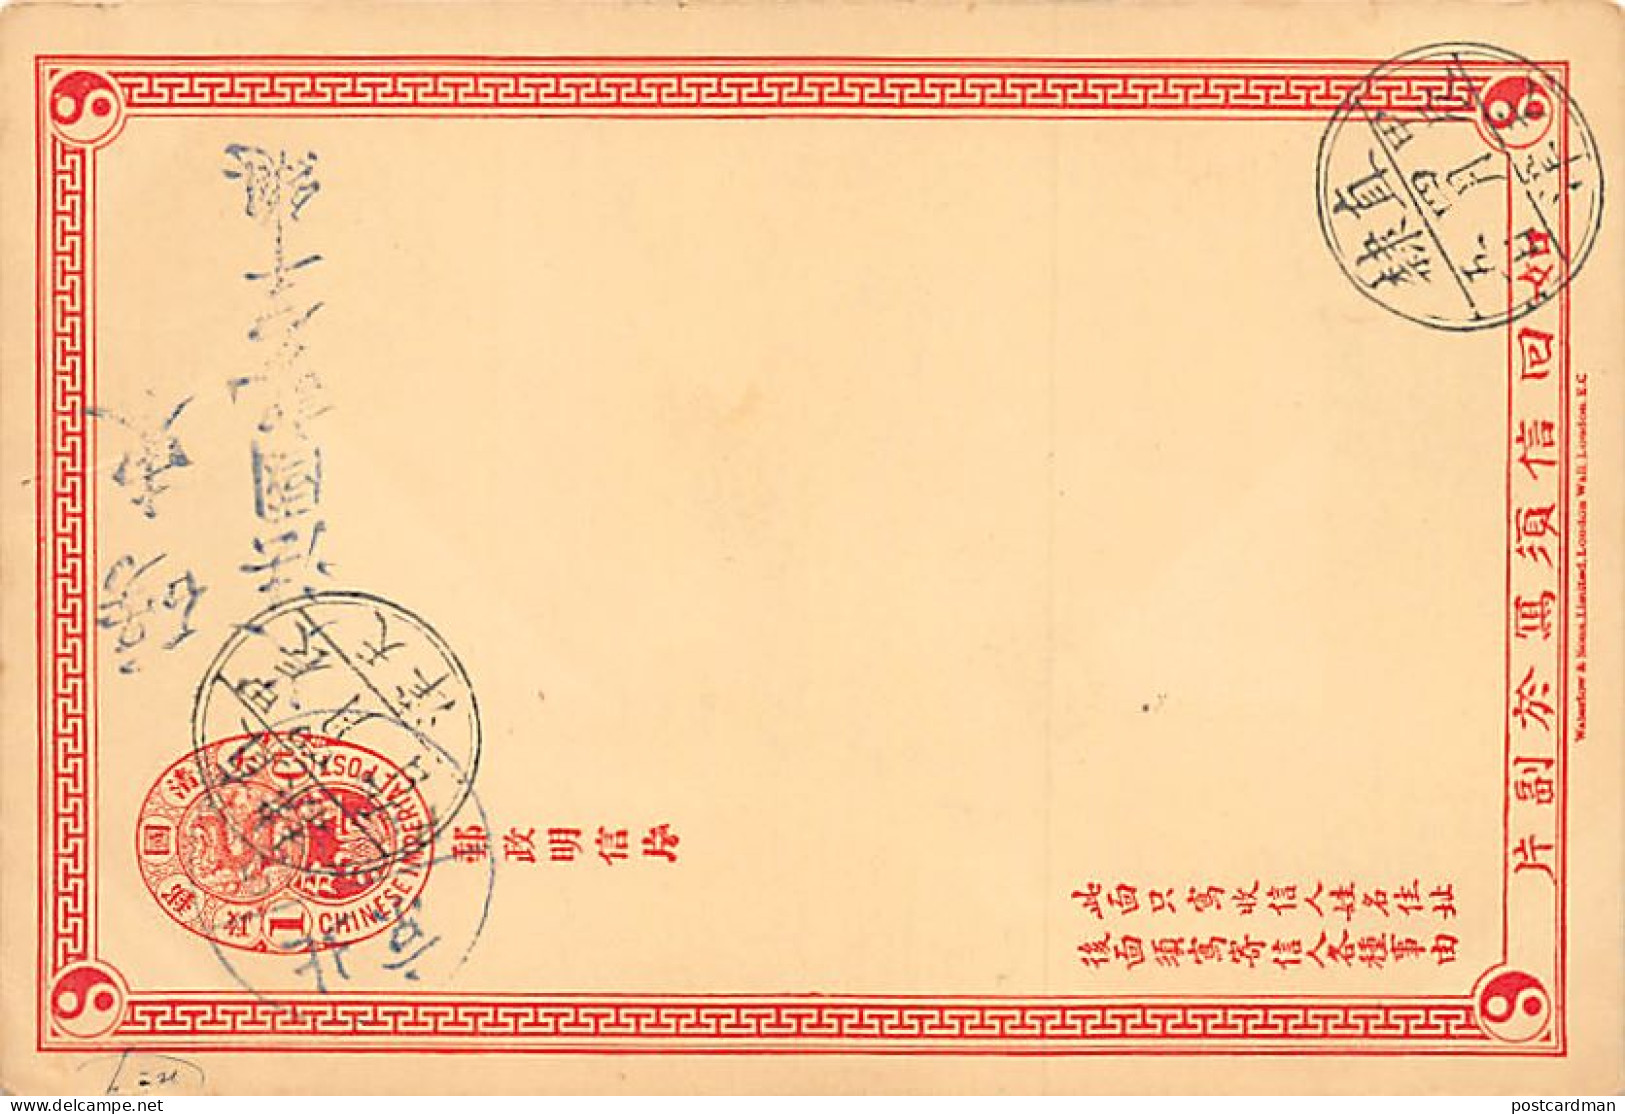 China - Chinese Ladies - Welcoming Guests - HANDPAINTED POSTCARD - Publ. Postal Stationery Chinese Imperial Post  1 Cent - China